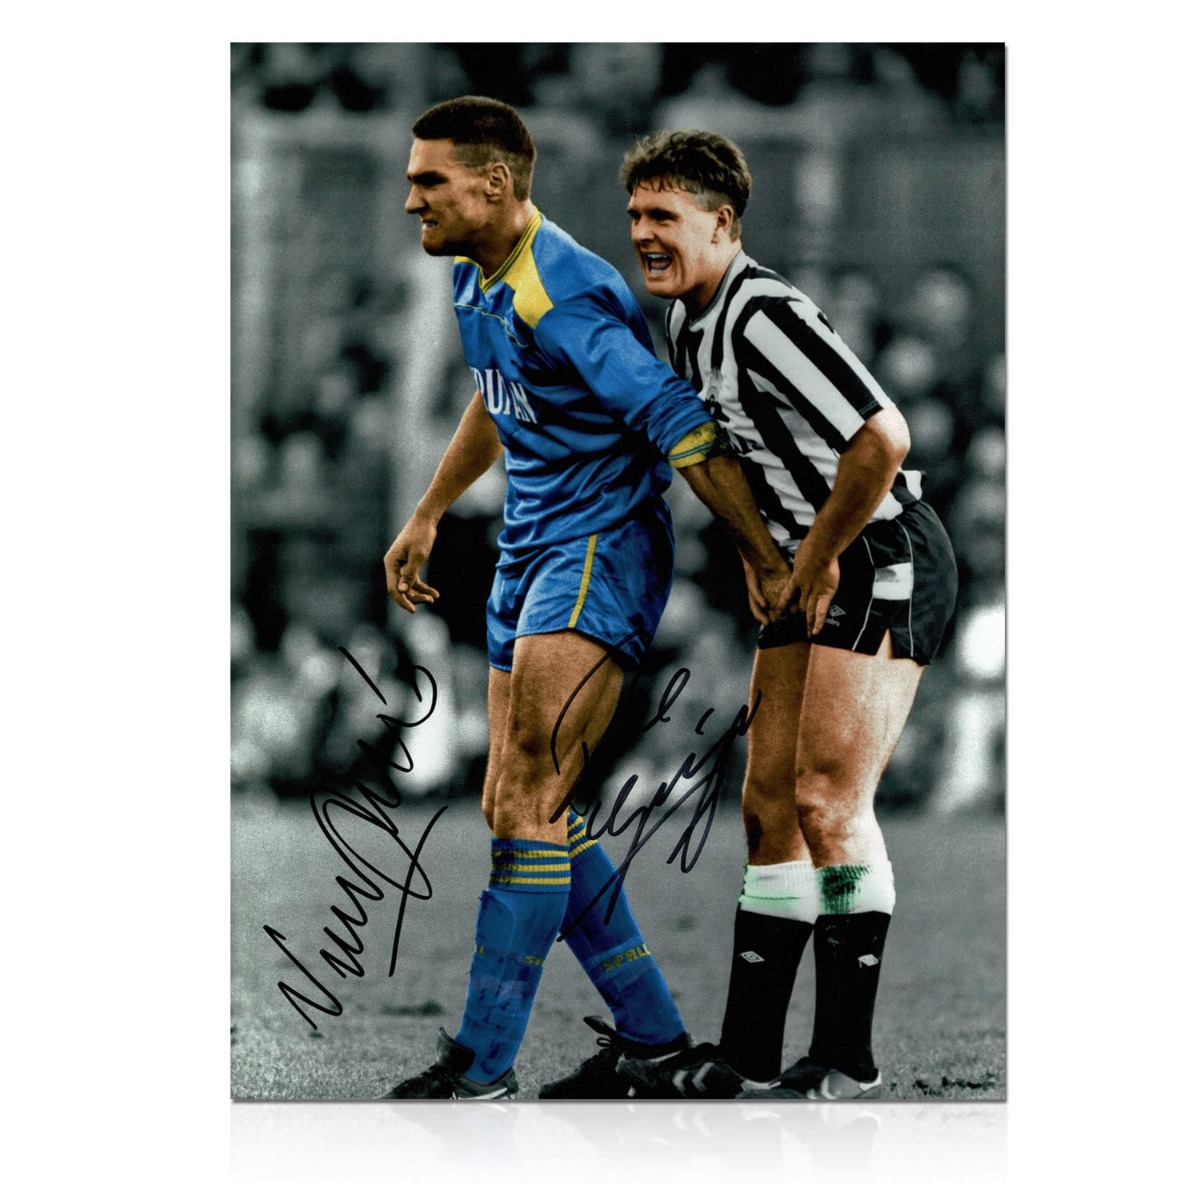 routinfly Framed Paul Gazza Gascoigne Newcastle United signed 16x12 inch photo with COA and proof. 